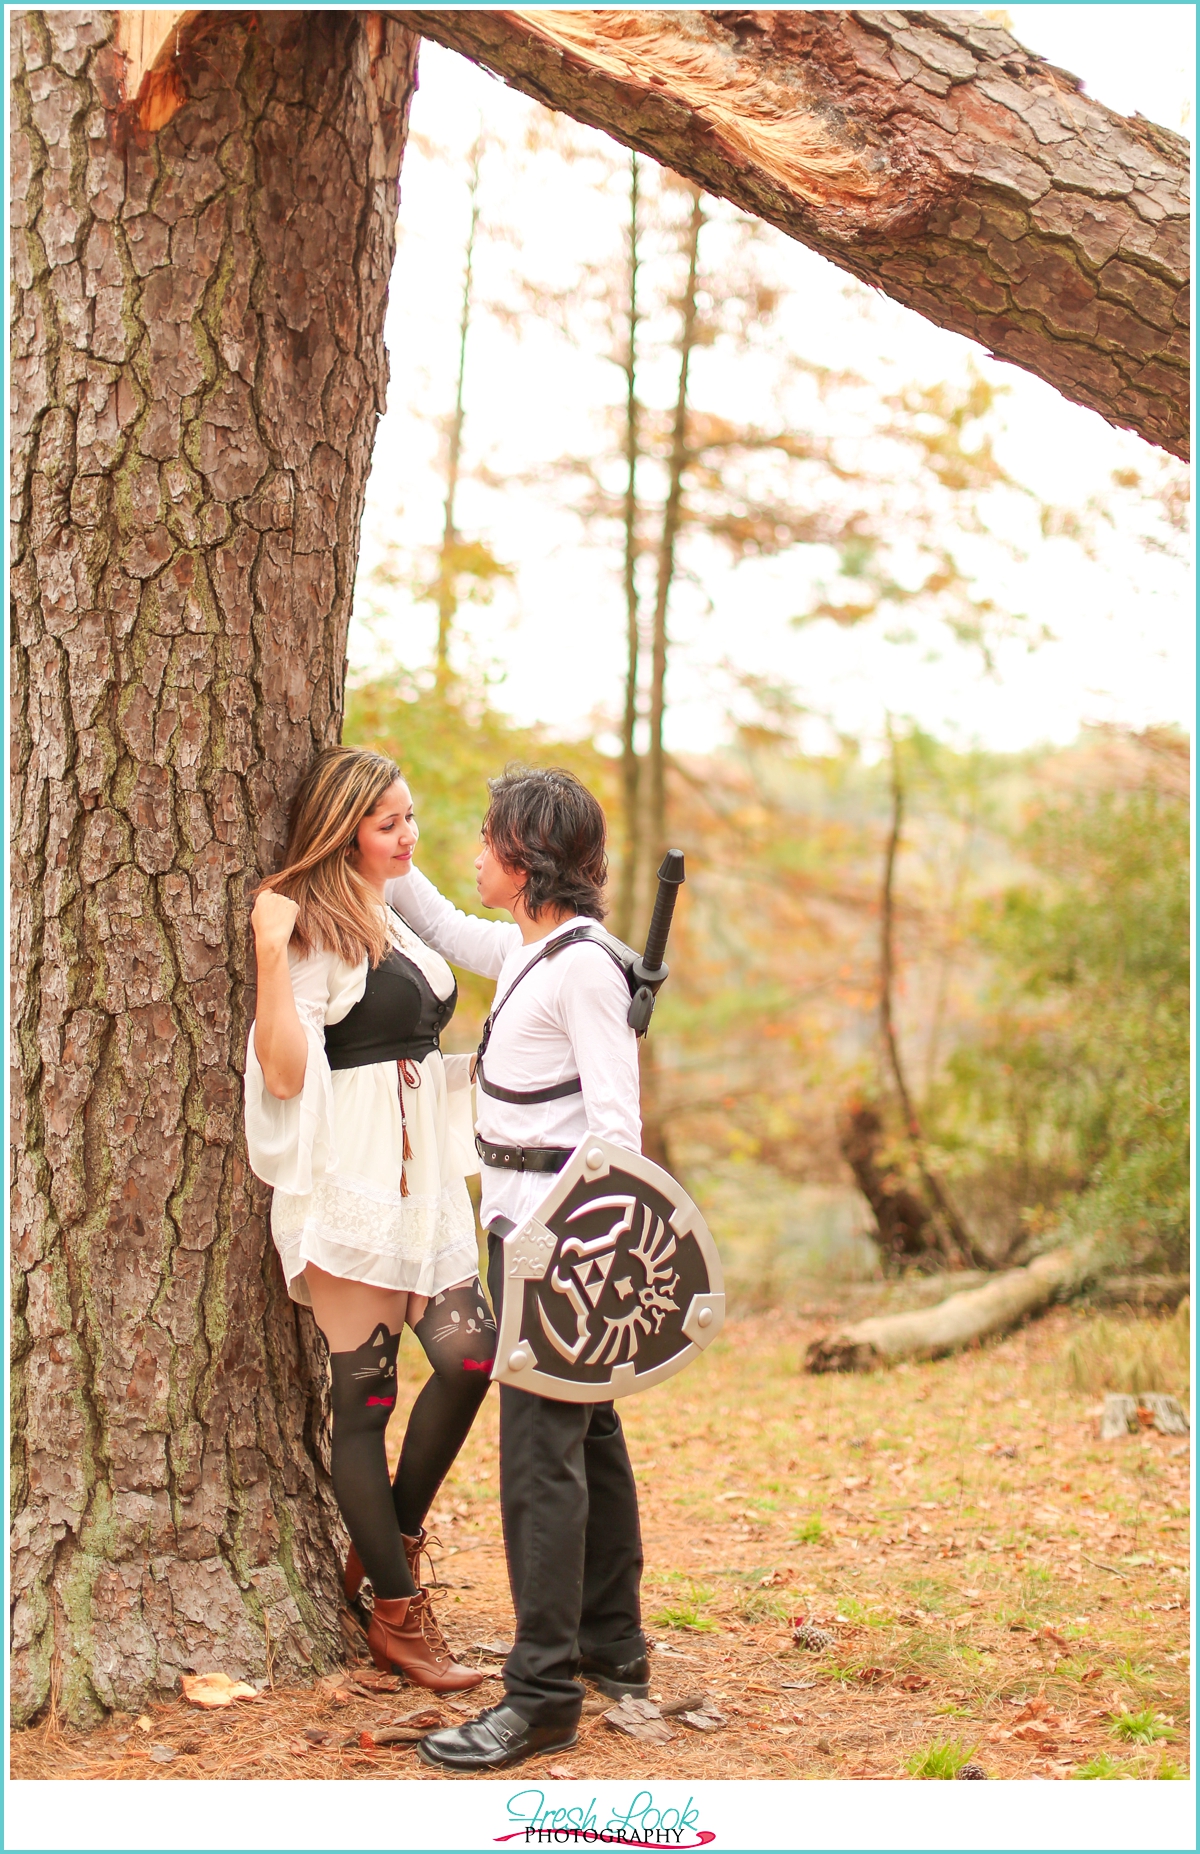 Cosplay engagement shoot